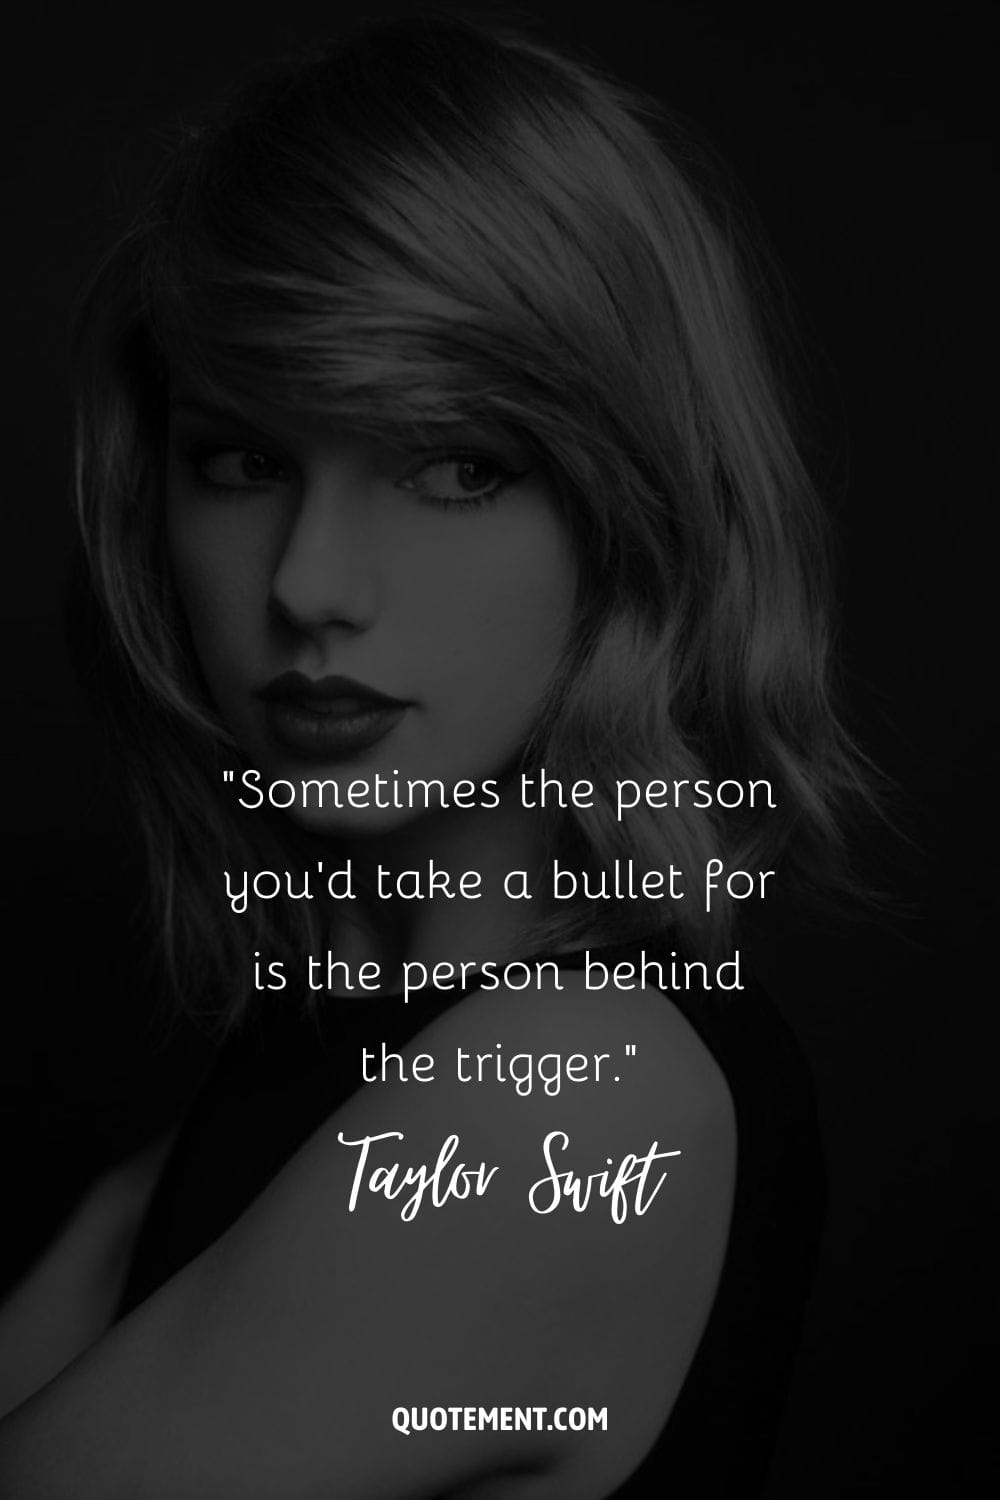 “Sometimes the person you'd take a bullet for is the person behind the trigger.” ― Taylor Swift